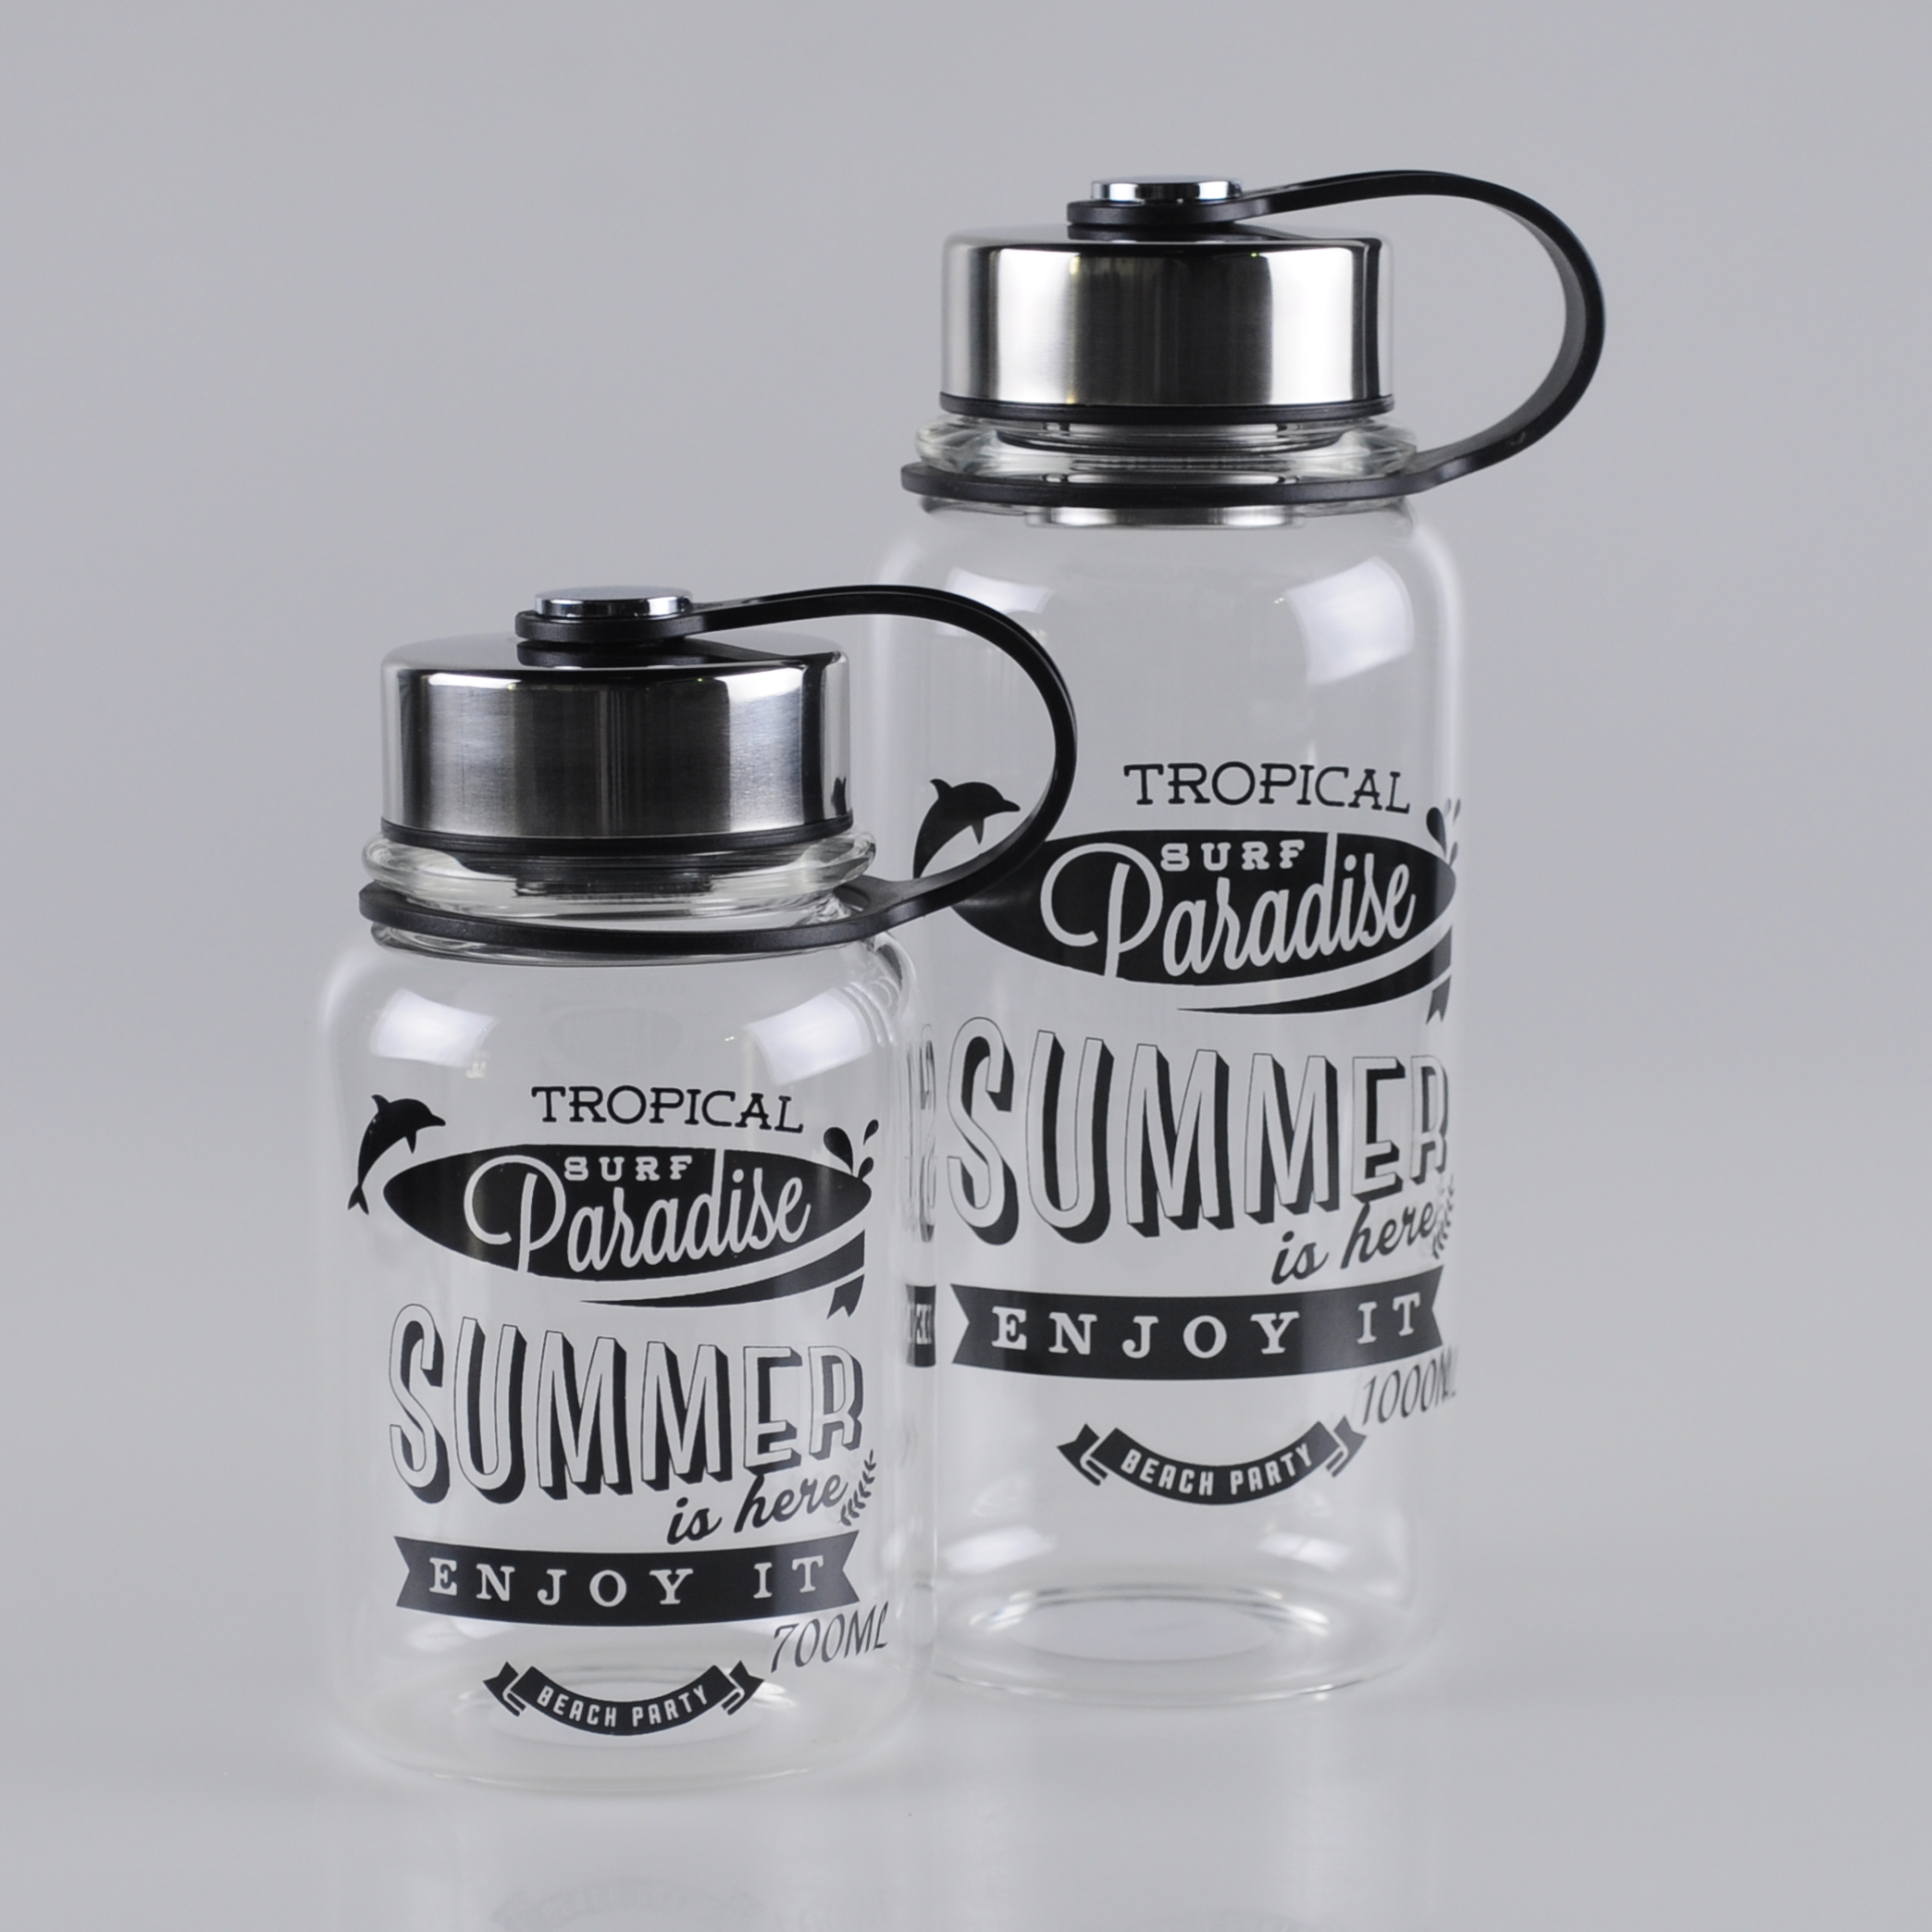 700ml-1000ml-carrying-stainless-steel-lid-big-volume-glass-travelling-bottle-with-pouch (1)